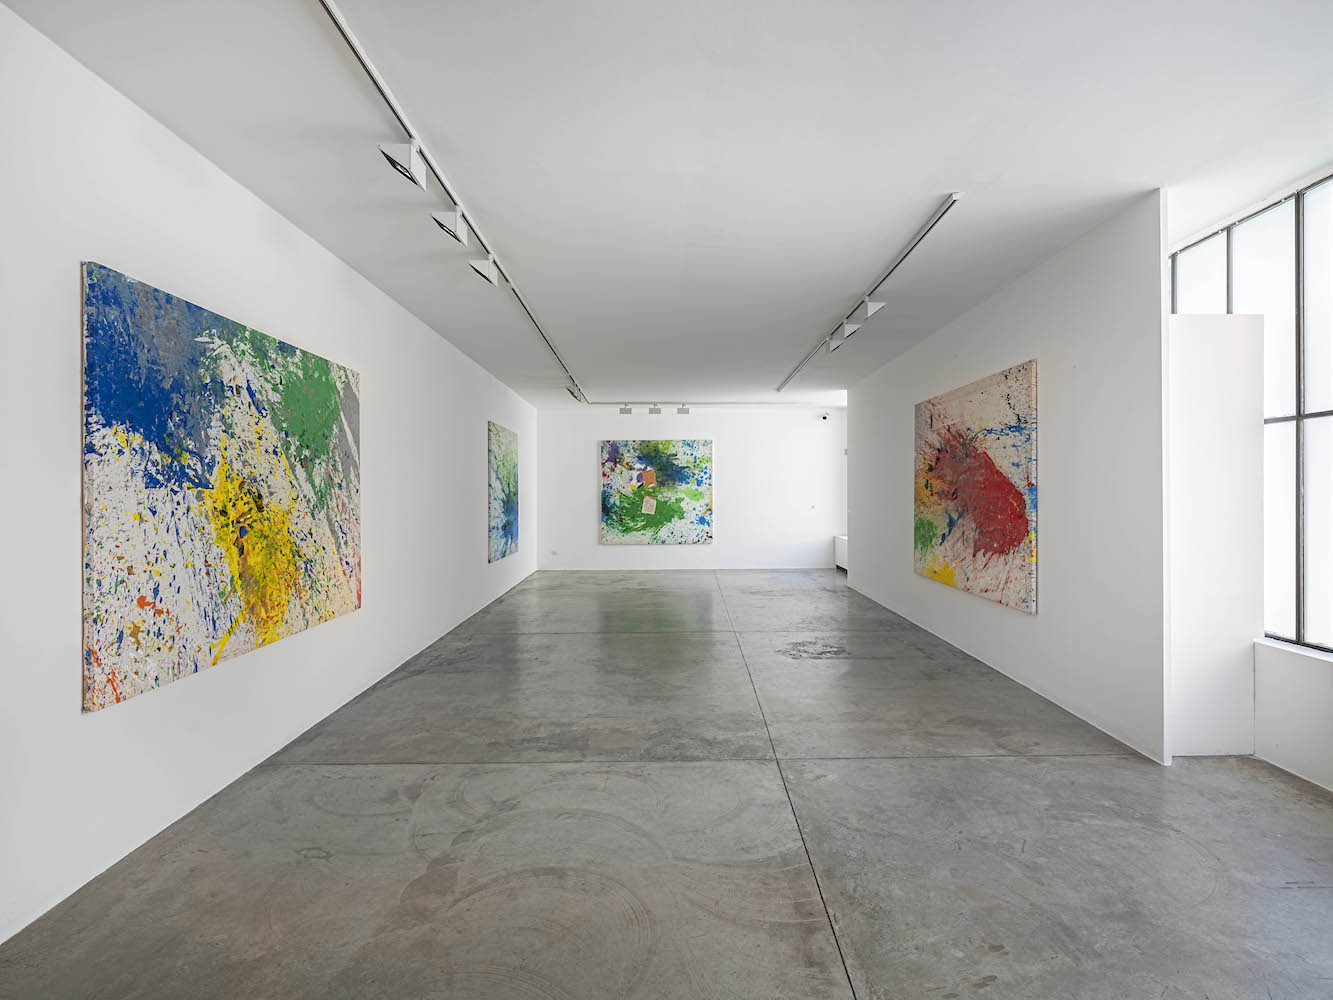 Installation view of works by Shozo Shimamoto at Cardi Gallery